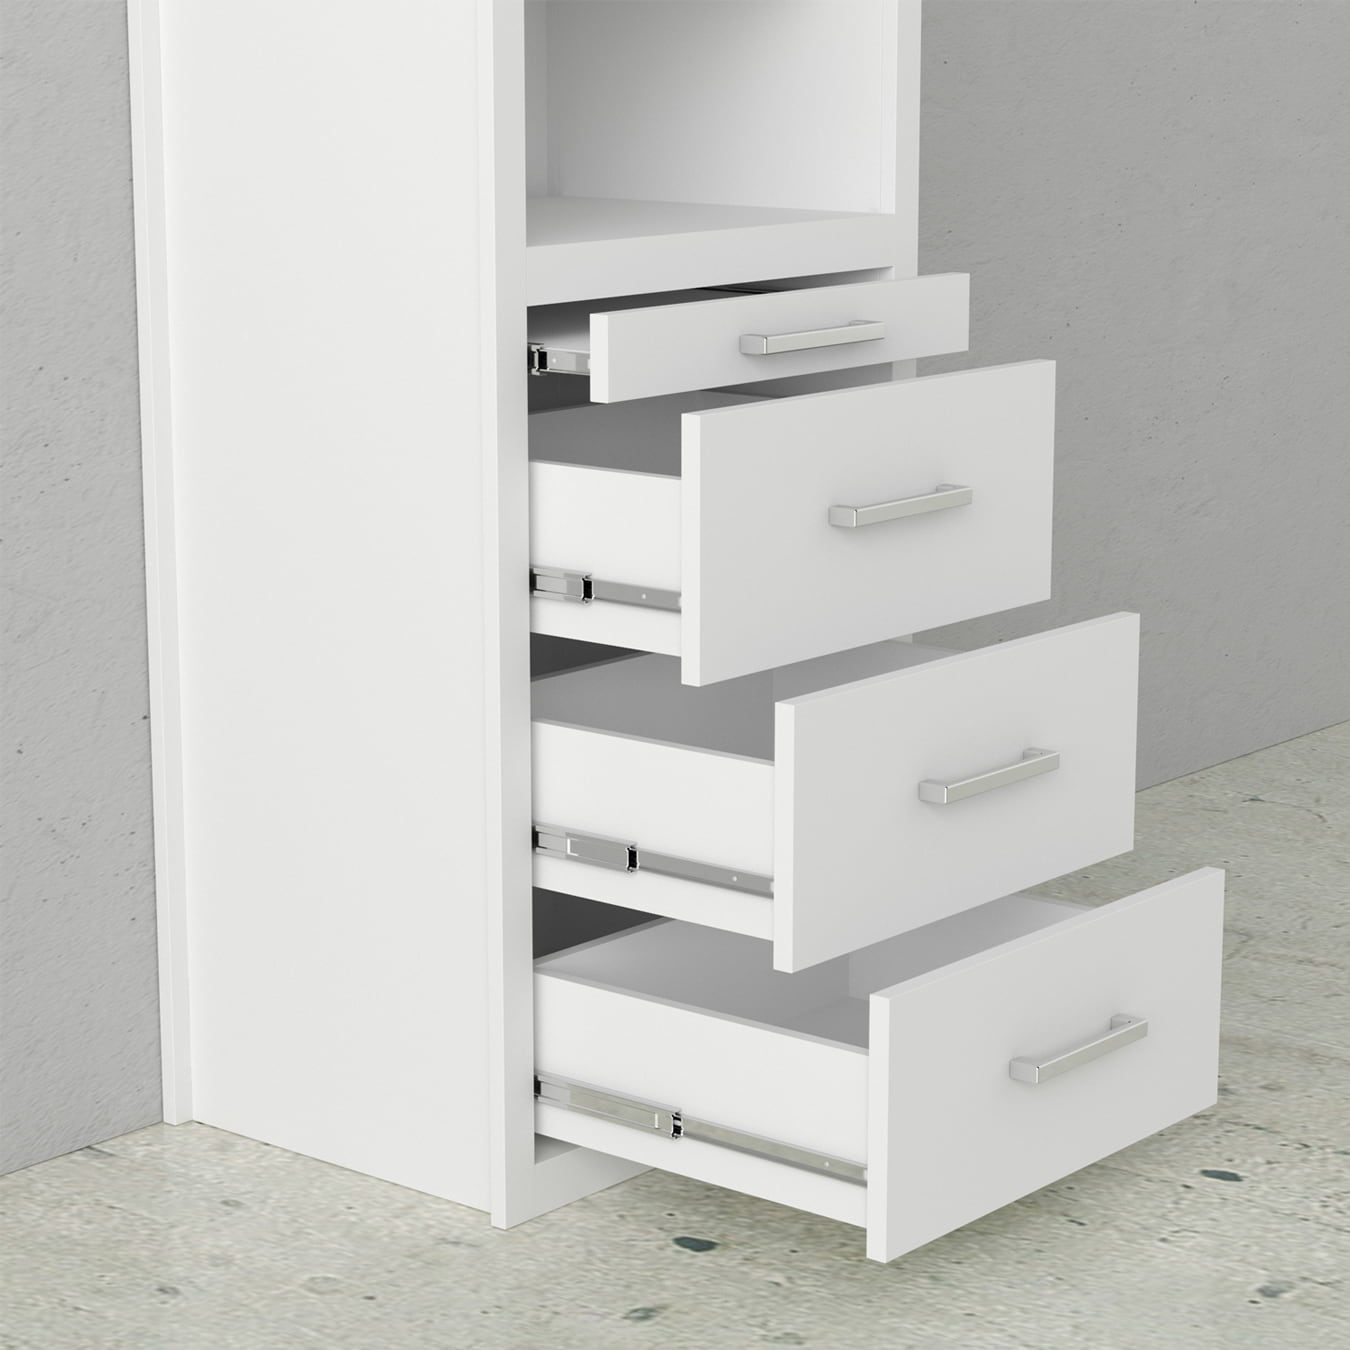 closer view of lower storage cabinet with pullout night stand and drawers